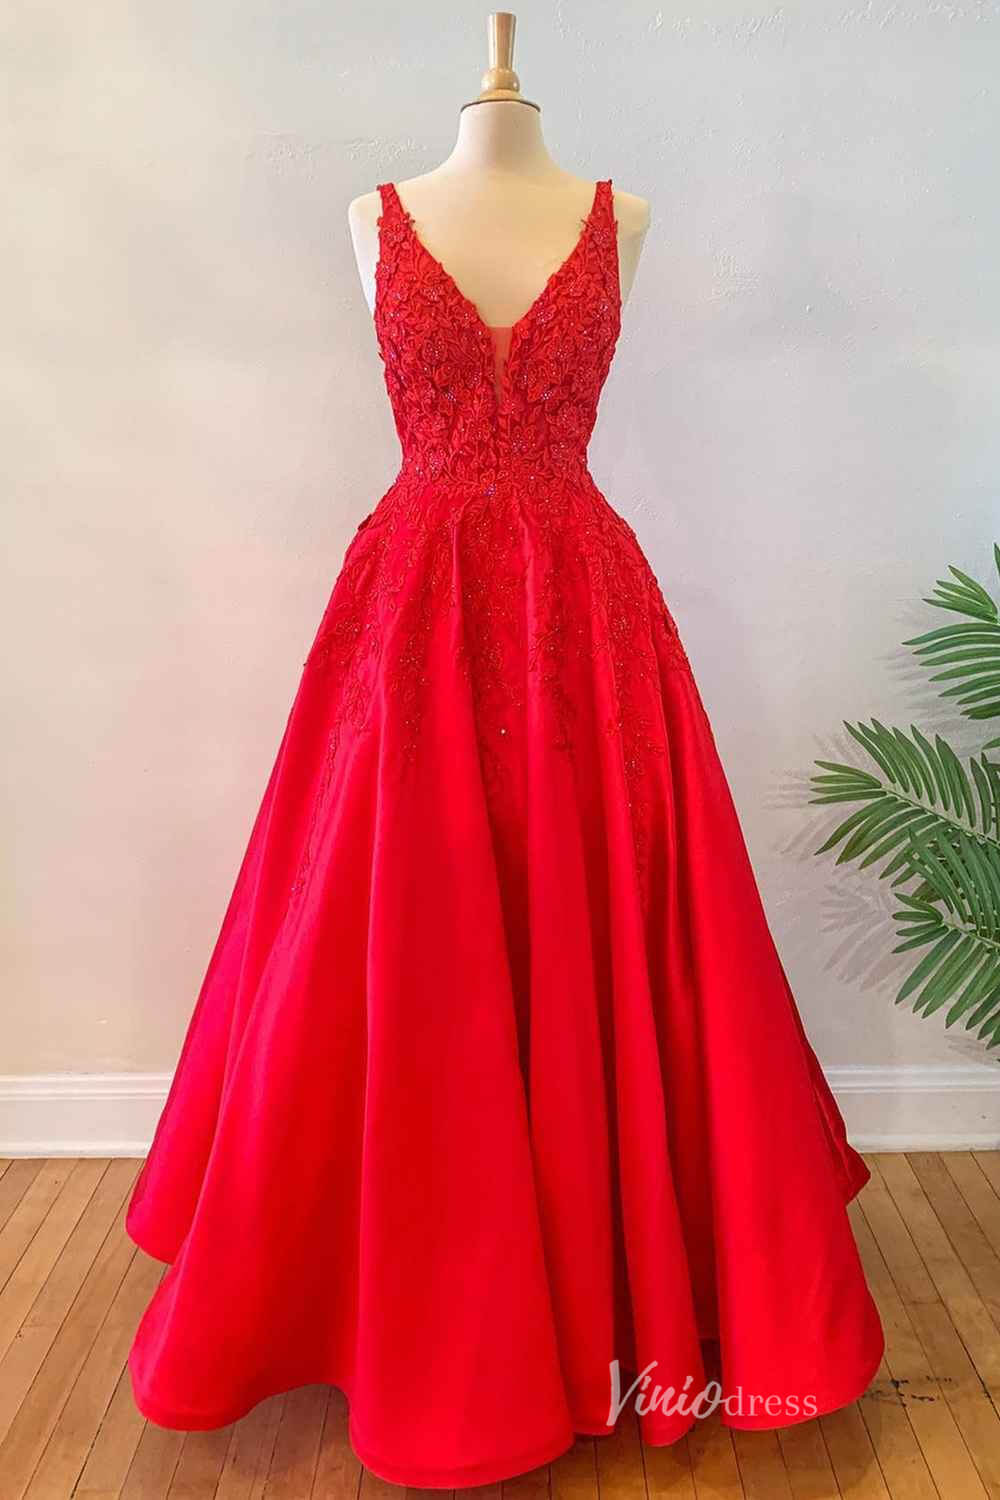 Red Lace Applique Cheap Prom Dresses Plunging V-Neck Satin Formal Gown FD4094-prom dresses-Viniodress-Red-Custom Size-Viniodress